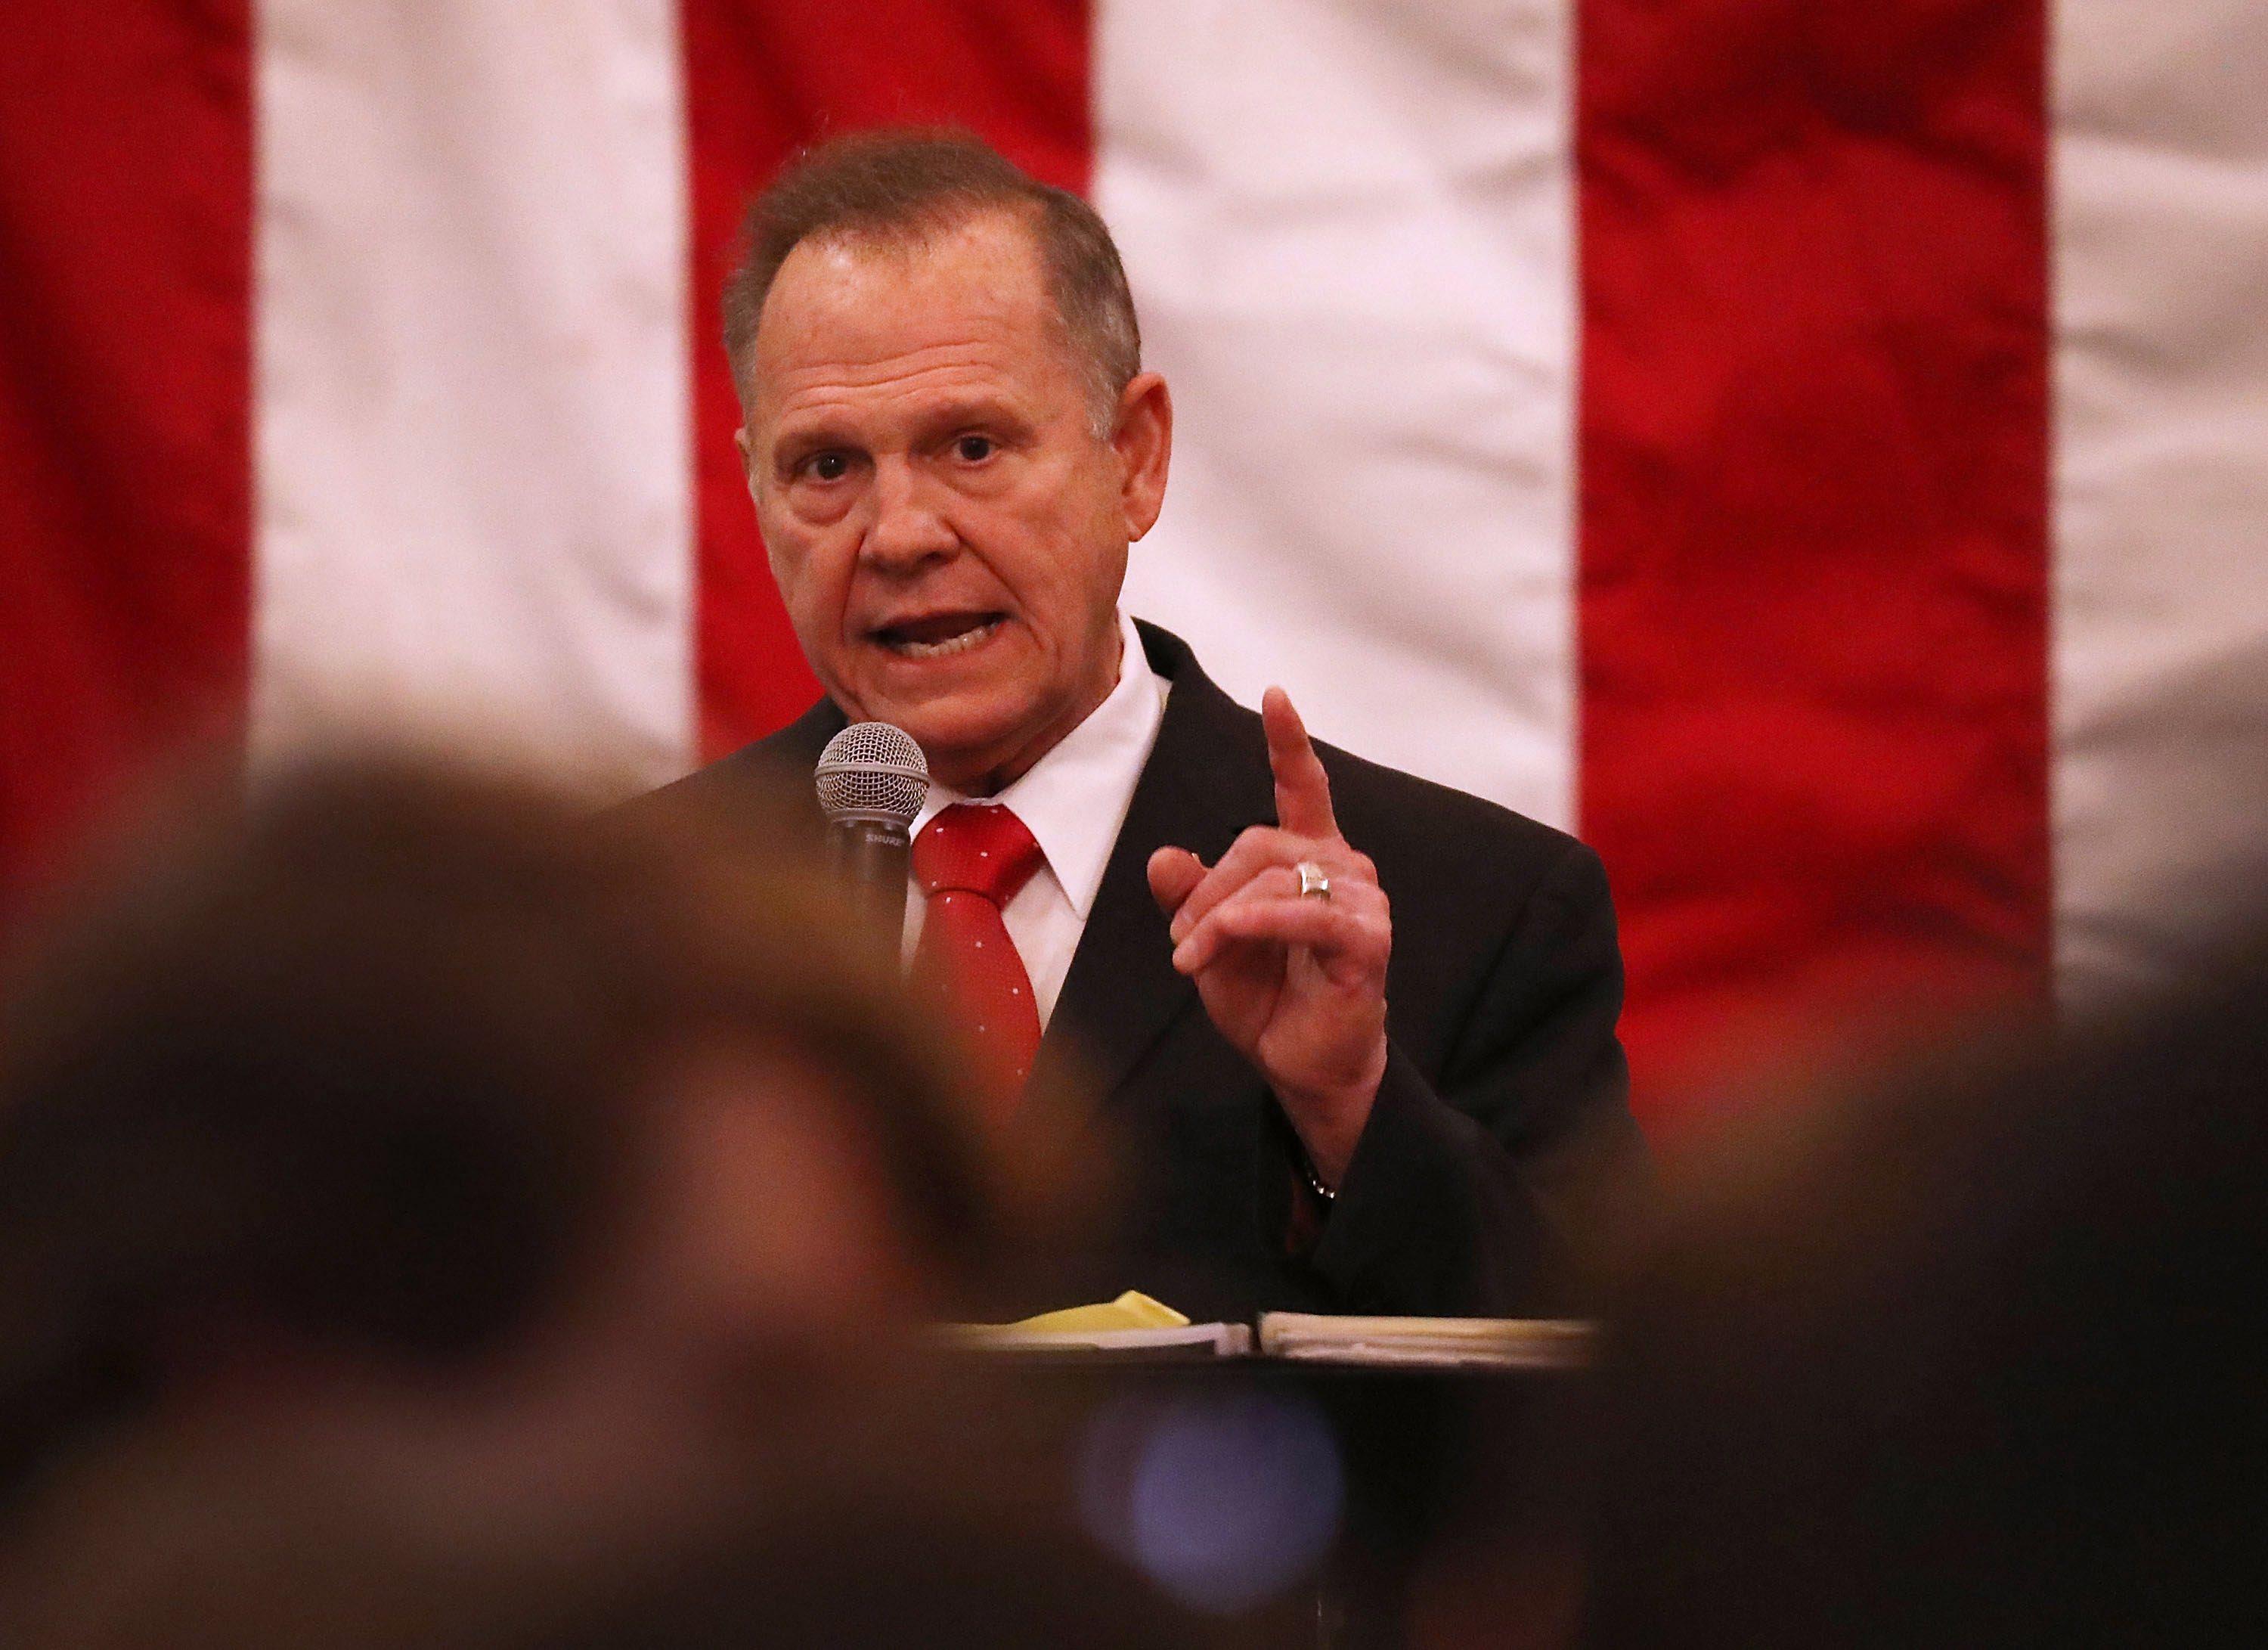 Roy Moore speaks at a campaign event in Alabama